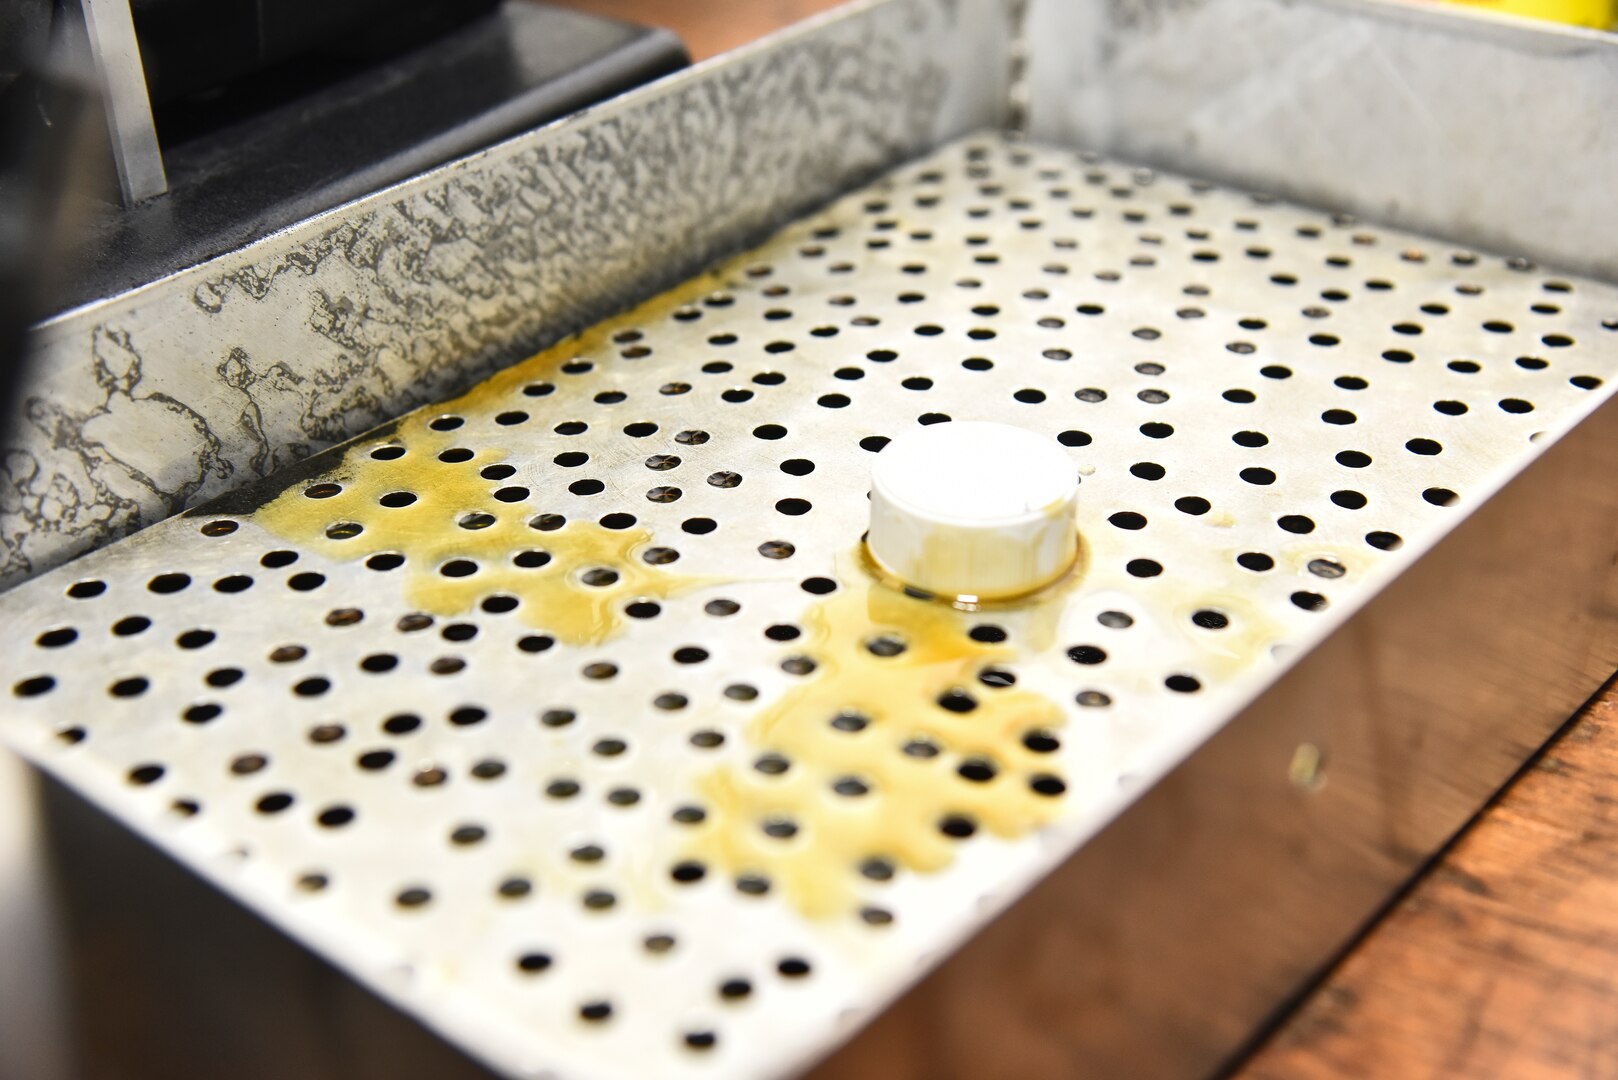 Standard oil sits in a catch tray in the 380th Expeditionary Maintenance Squadron Non-Destructive Inspection shop at Al Dhafra Air Base, United Arab Emirates, Dec. 7, 2018. The NDI shop uses certain techniques, including fluorescent penetrant inspections and special oil analyses. These are some of the numerous methods used to repair, diagnose or prevent damage to the aircraft, its oil, and the parts. (U.S. Air Force photo by Senior Airman Mya M. Crosby)